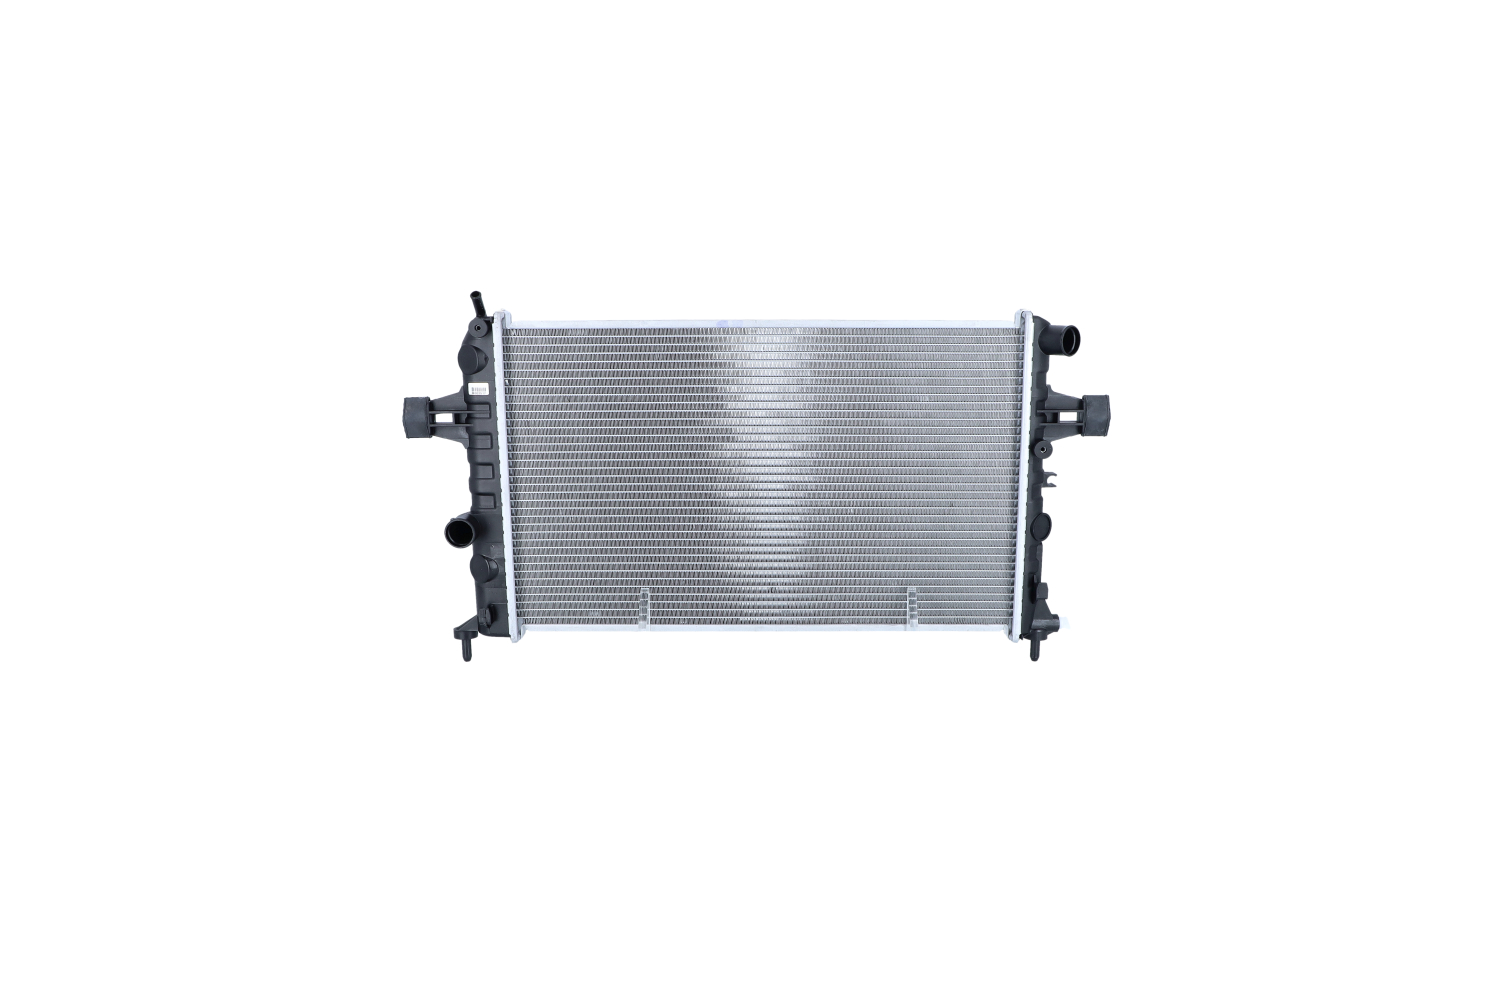 NRF EASY FIT 54668 Engine radiator Aluminium, 600 x 366 x 24 mm, with rubber grommet, Brazed cooling fins